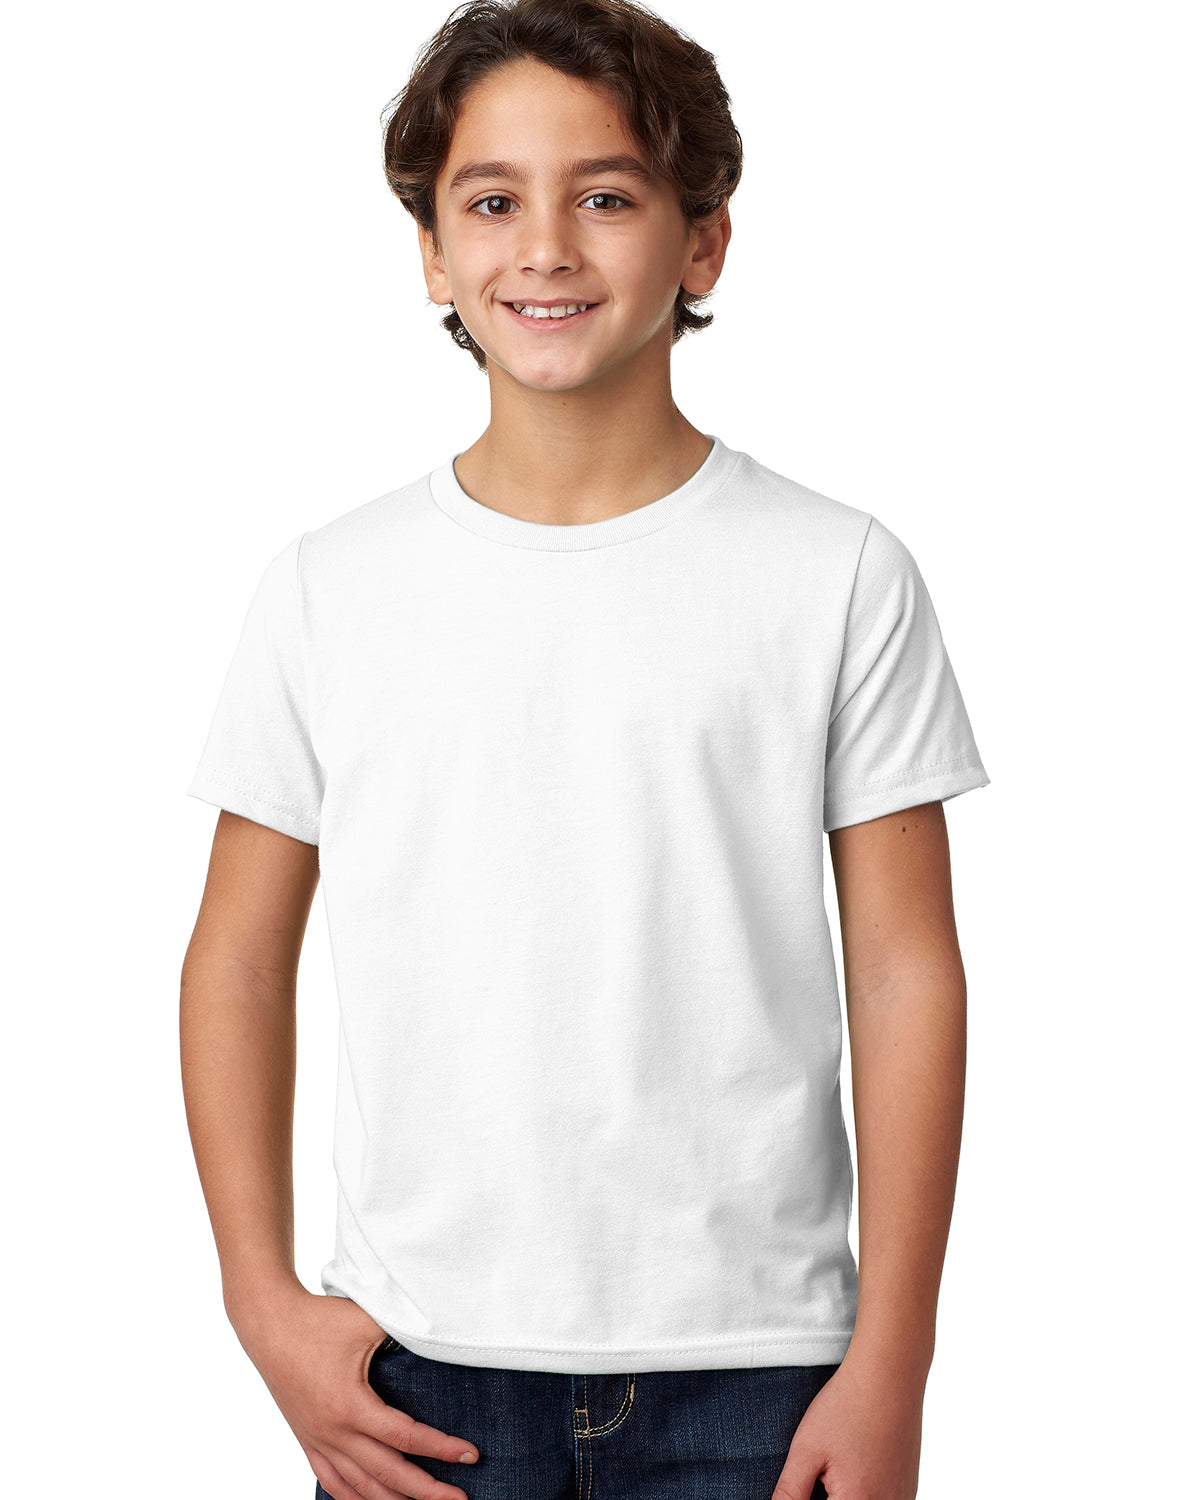 child model wearing next level youth CVC tee in white